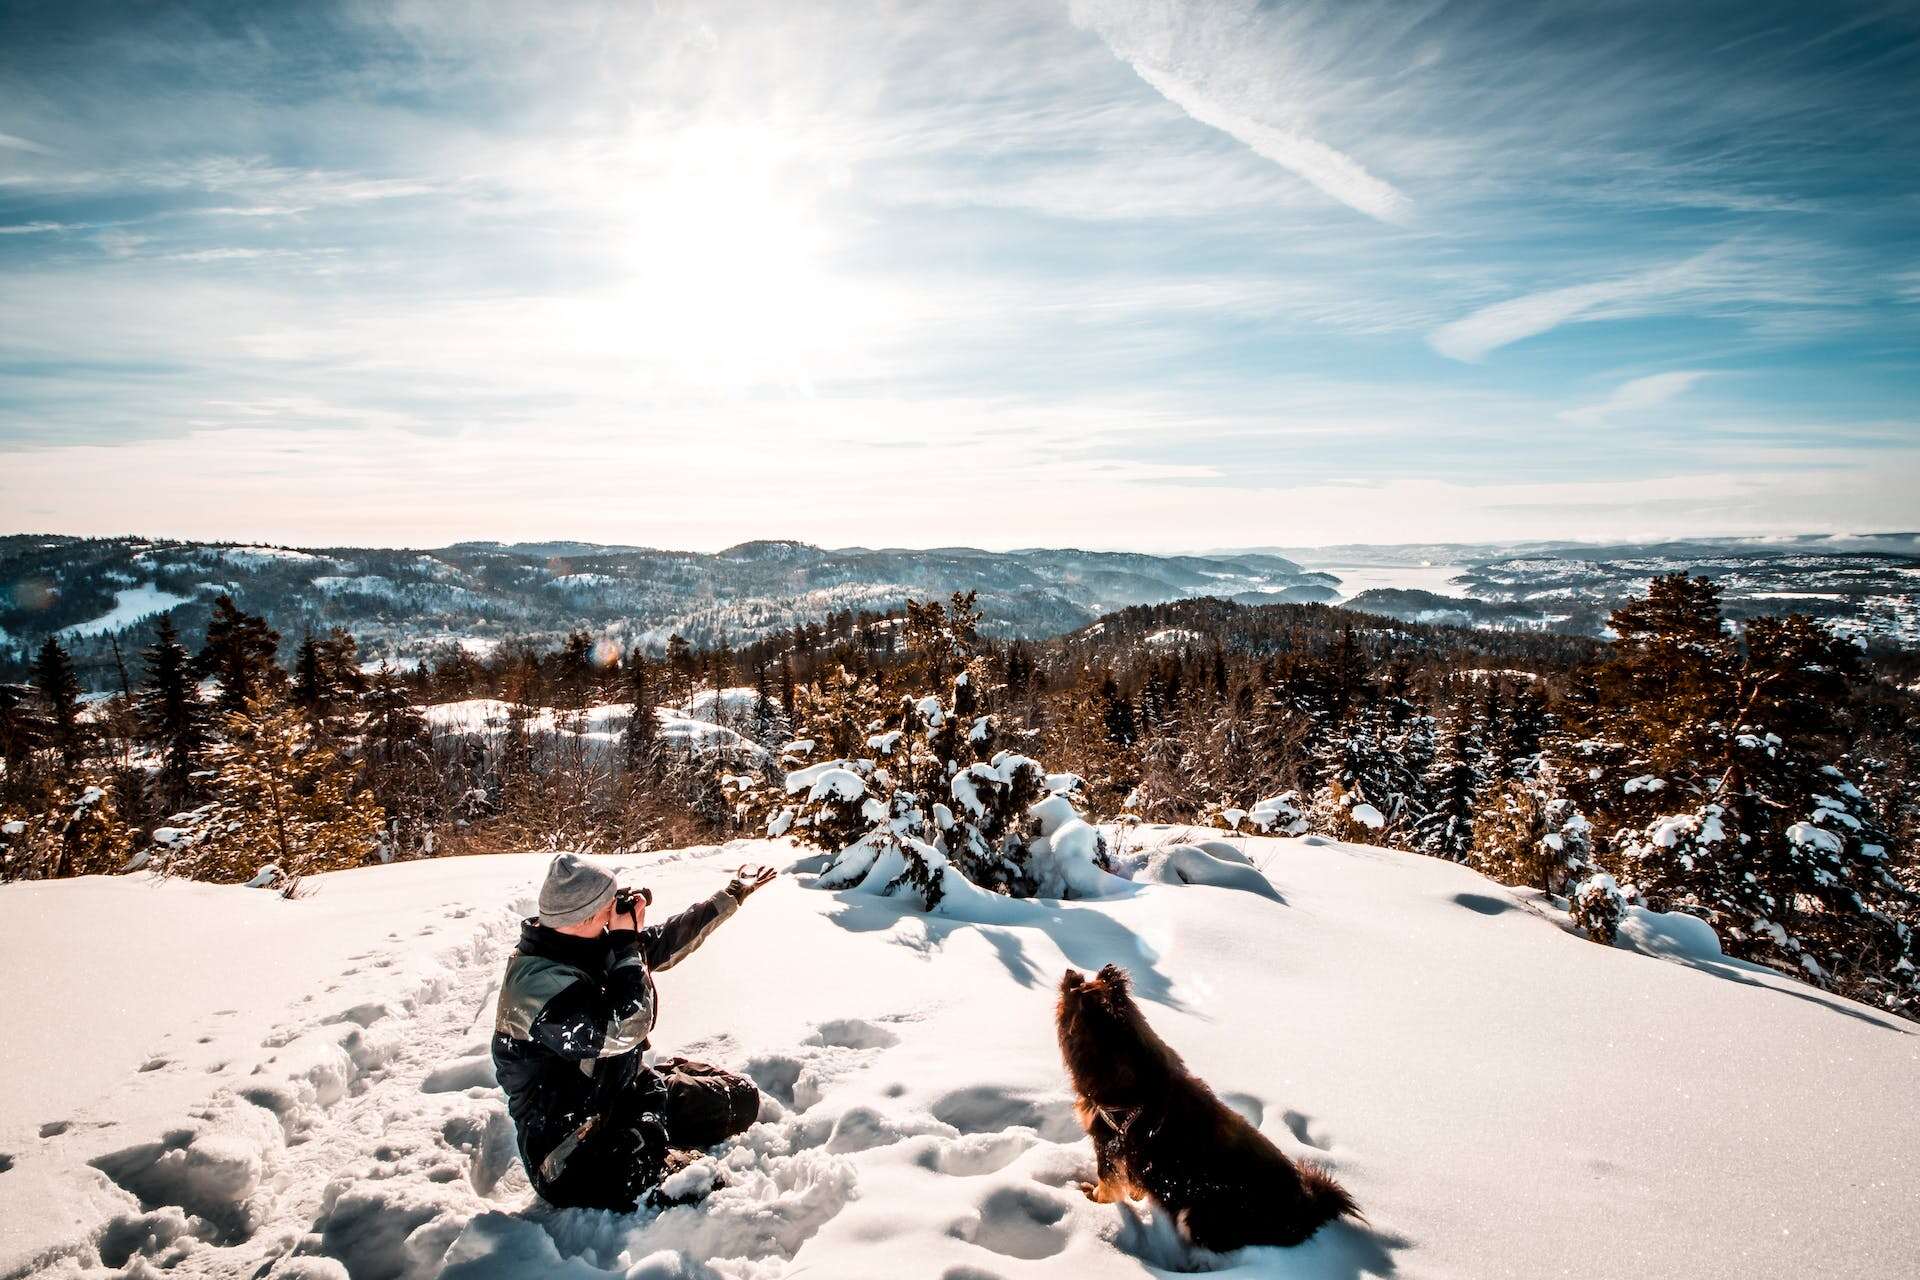 A man and a dog sitting in a snowy field in the mountains